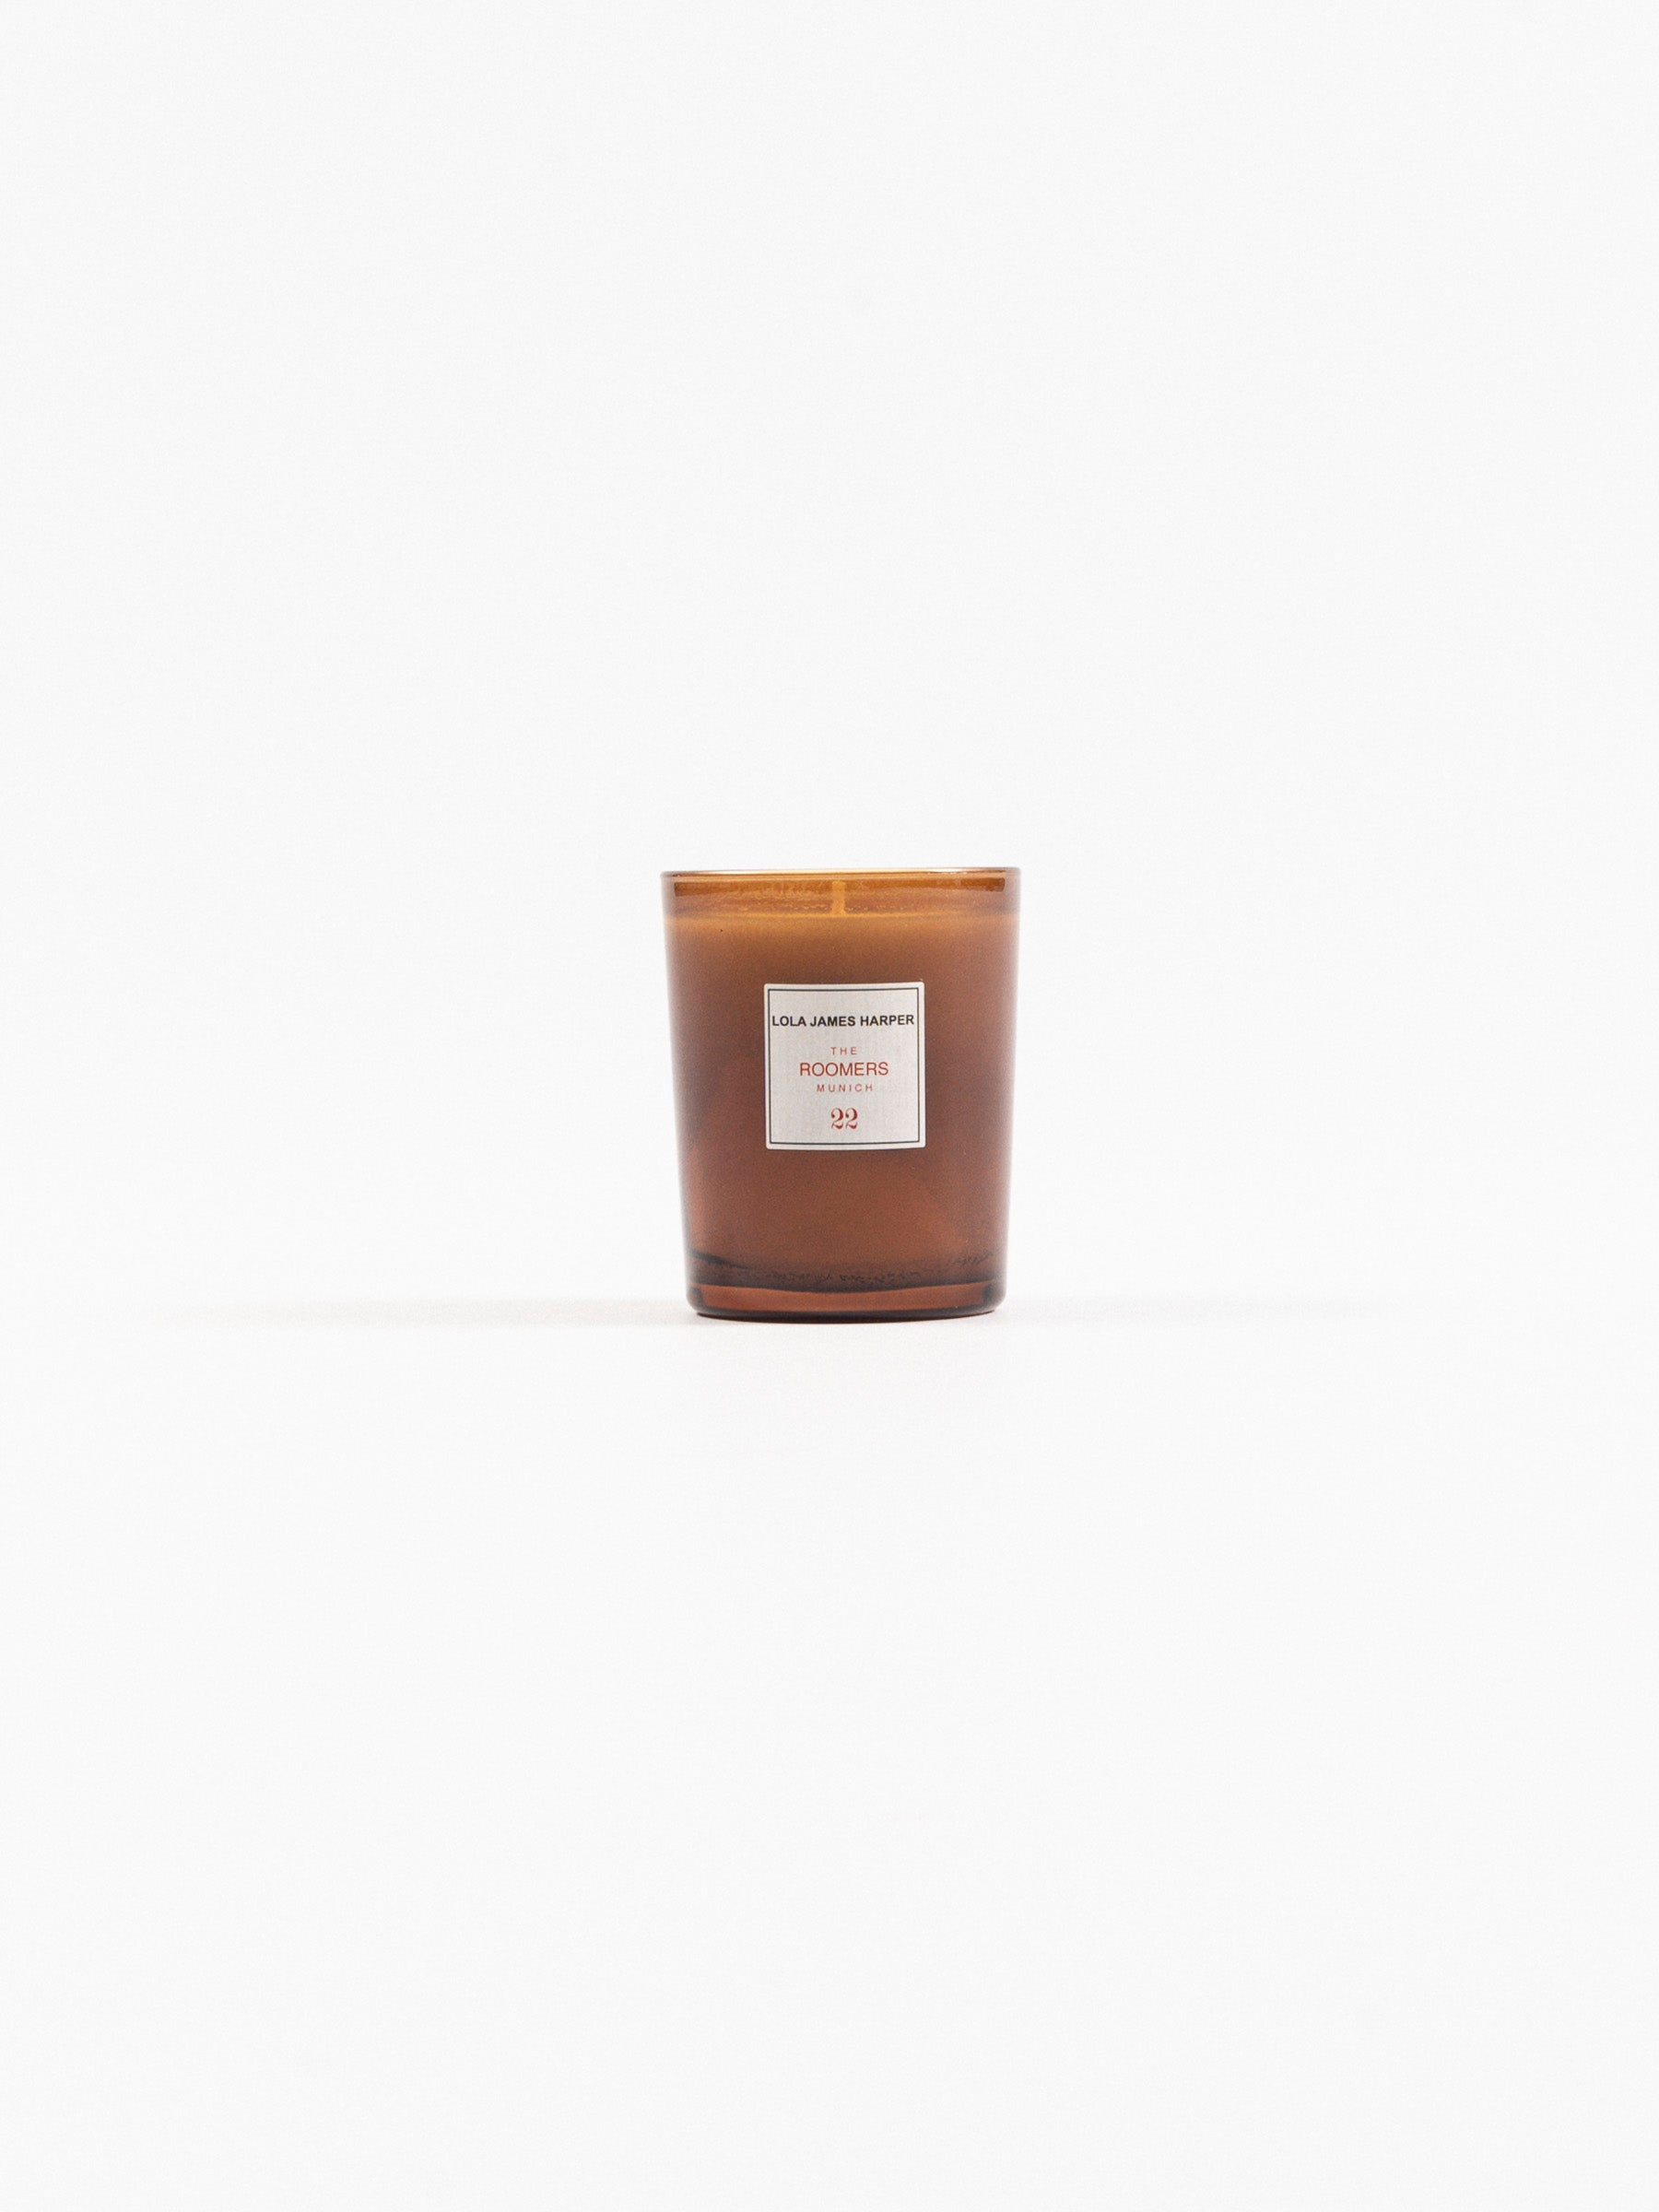 Roomers Munich Scent Candle